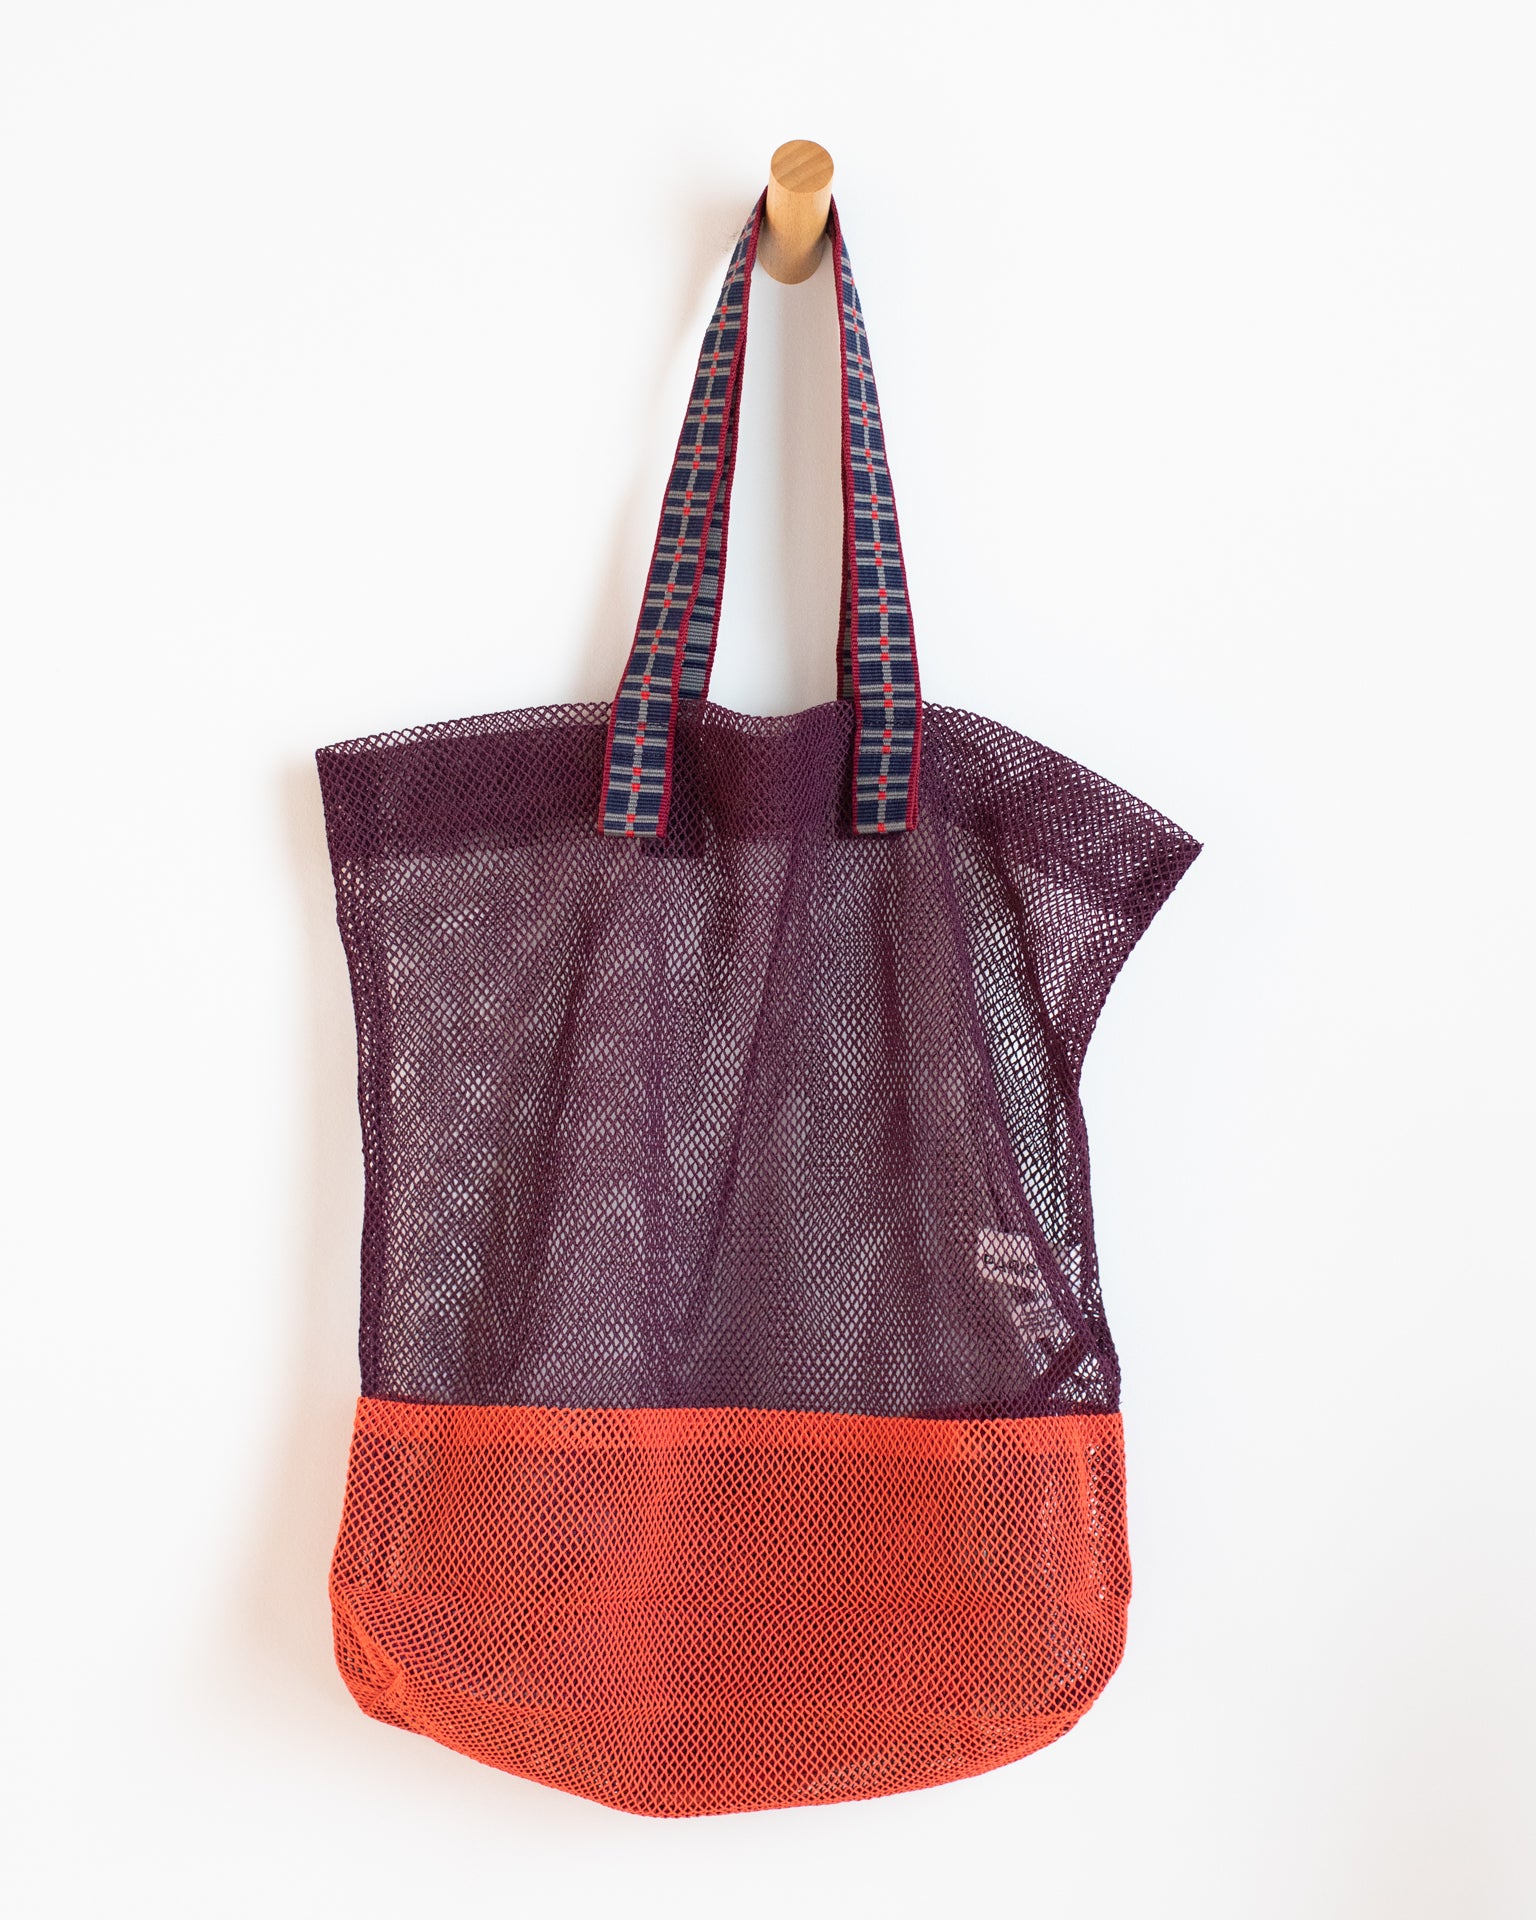 Small Mesh Bag in Burgundy/Red